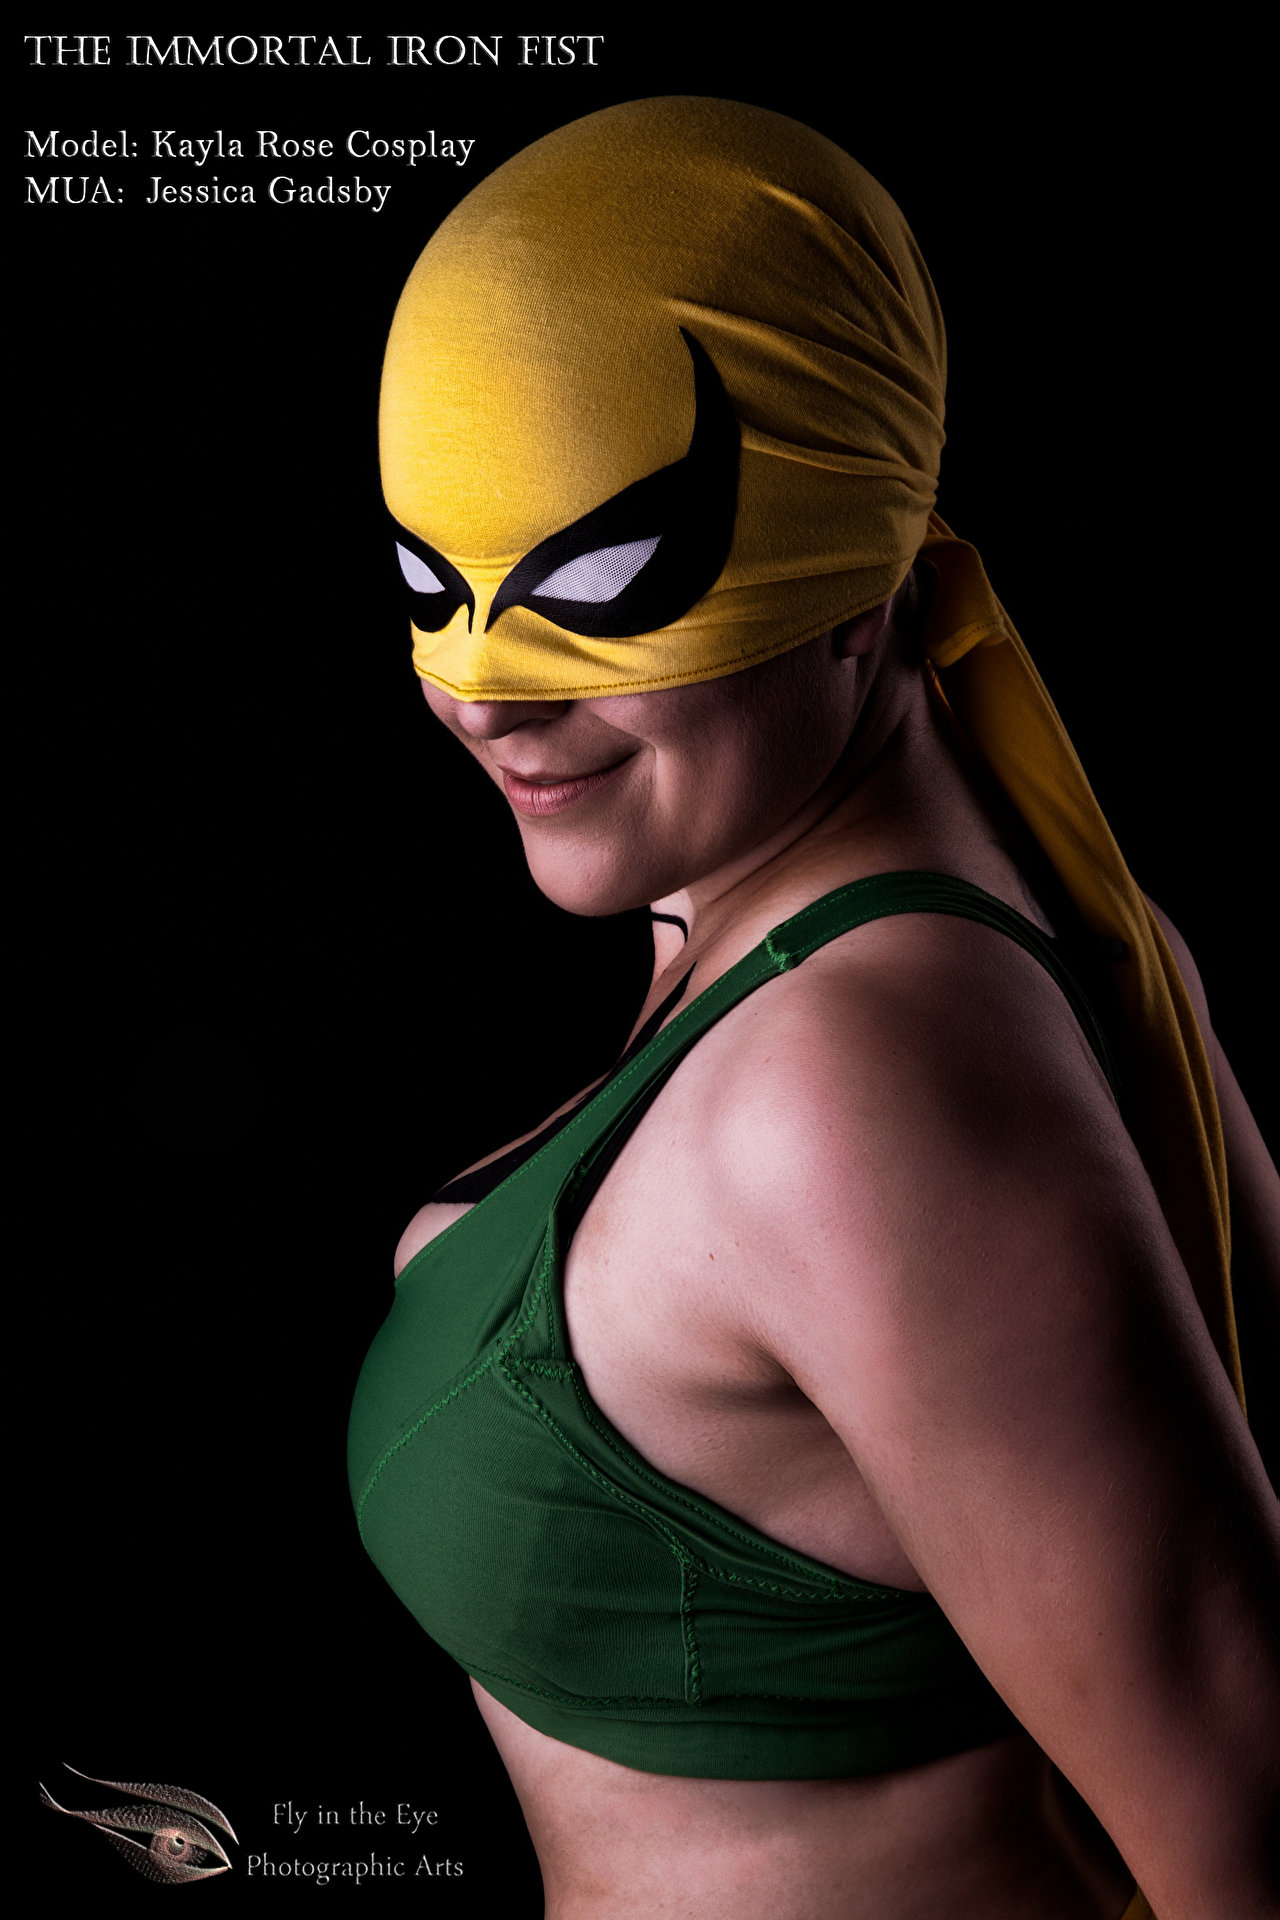 Cospix.net photo featuring Kayla Rose Cosplay